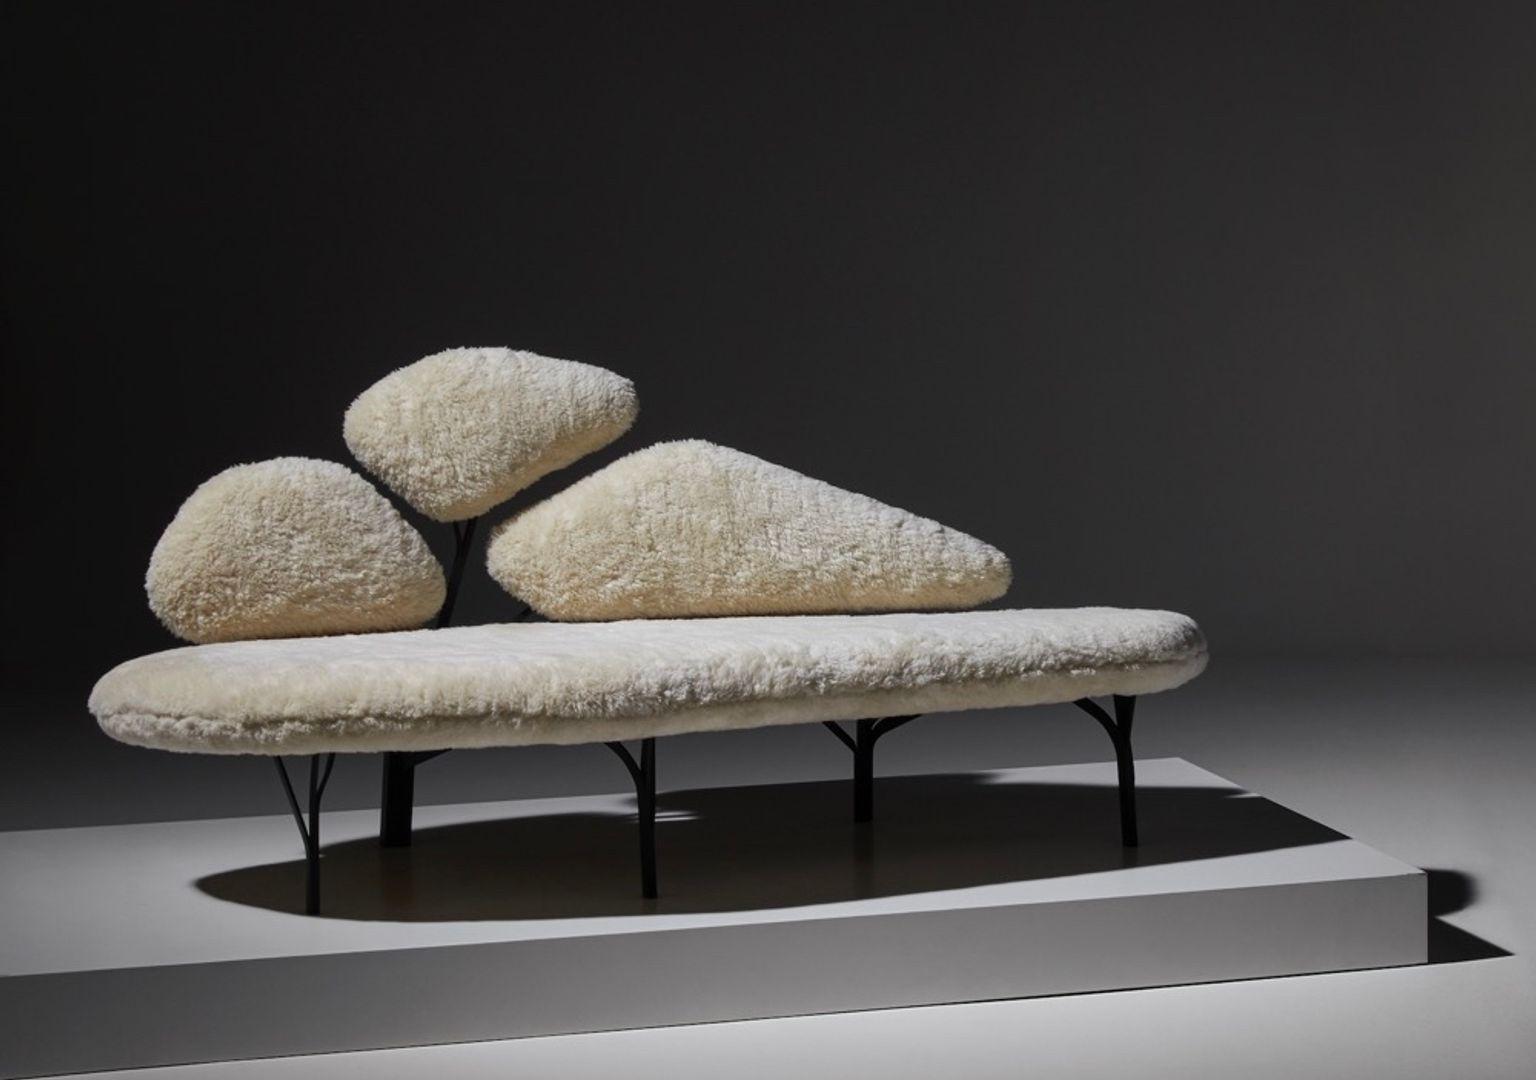 Borghese Sofa is a sculptural piece directly inspired and named after the pine trees of the Villa Borghese gardens in Roma. The designer’s preference for organic shapes readily translates as a standout modernist statement-piece.

It is possible to